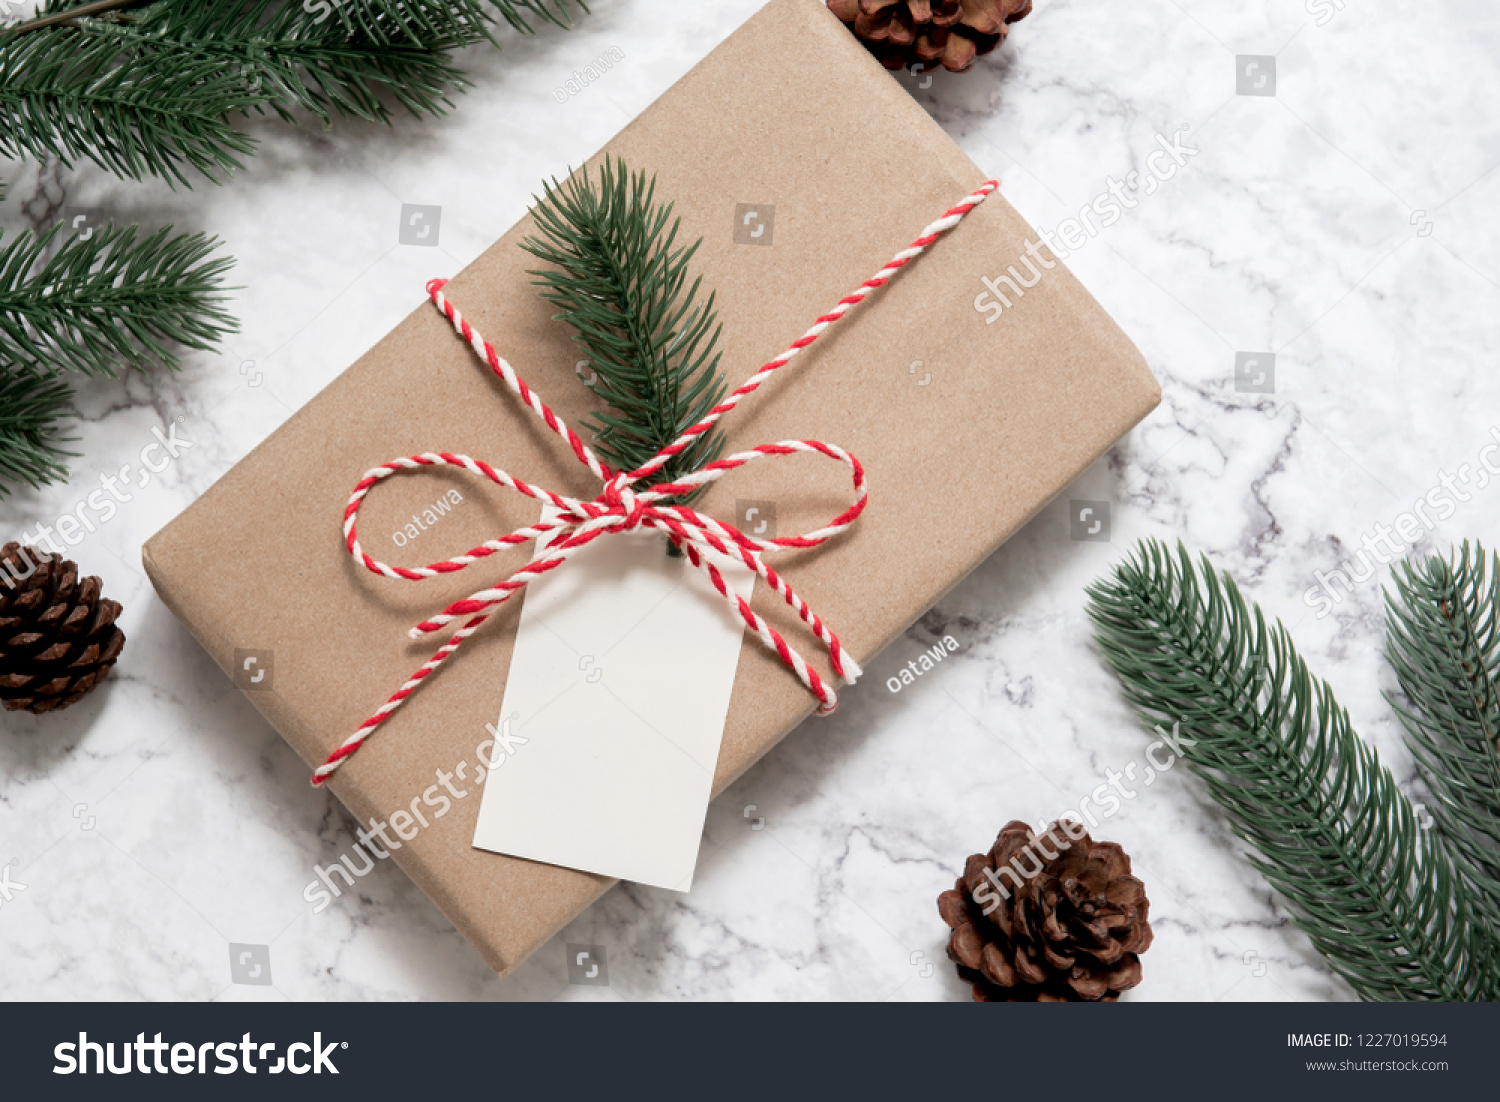 Christmas gift box with note card and tree branch decor on marble background. Flat lay, Top view with copy space #1227019594